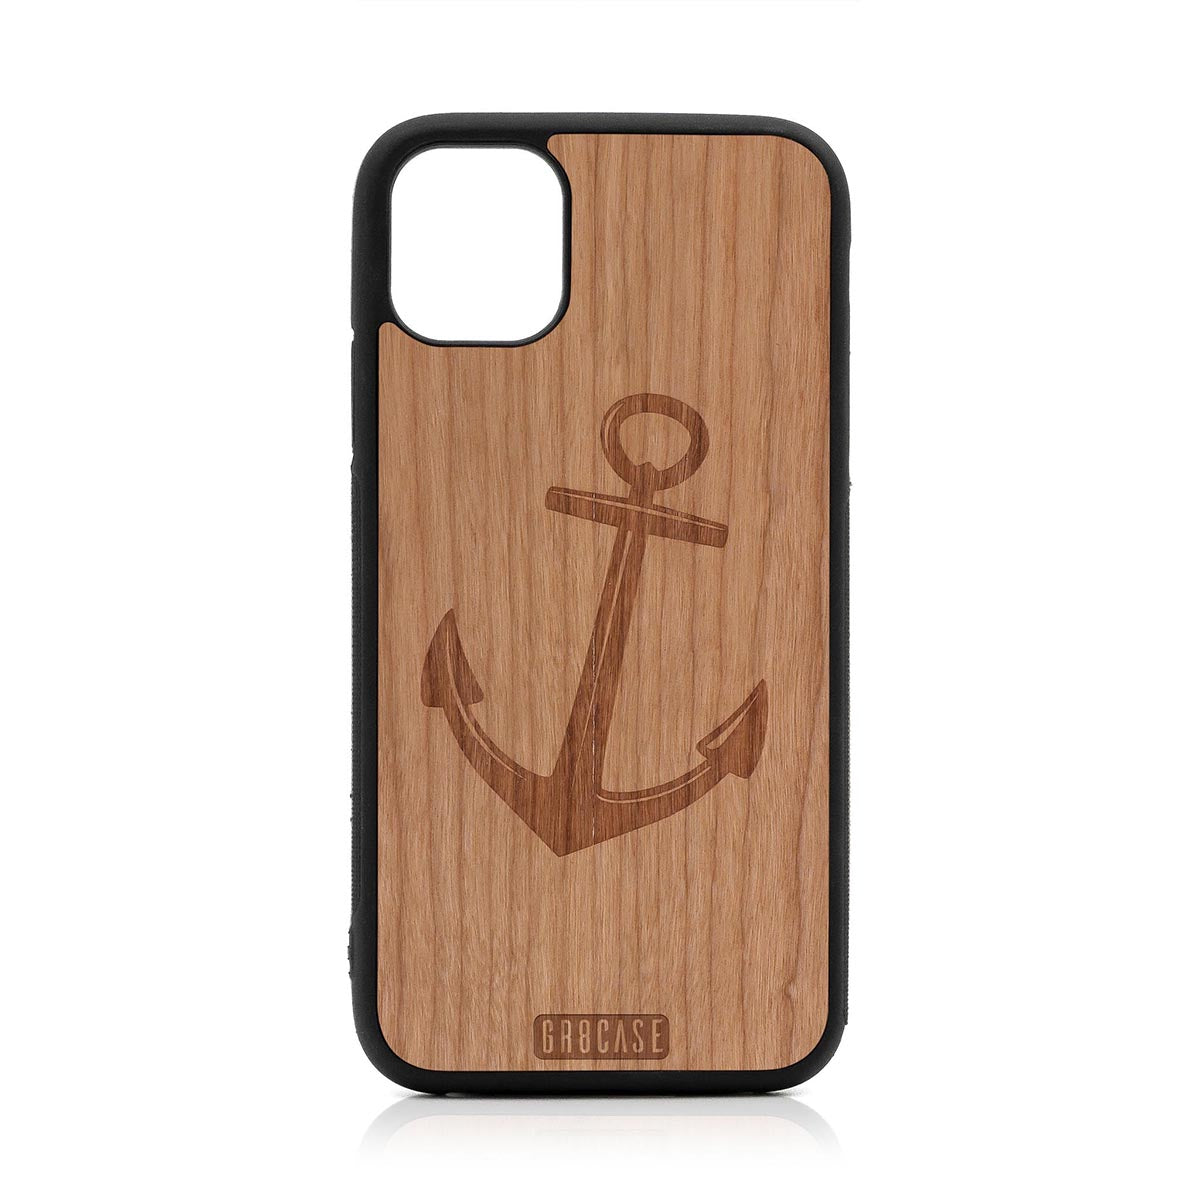 Anchor Design Wood Case For iPhone 11 by GR8CASE